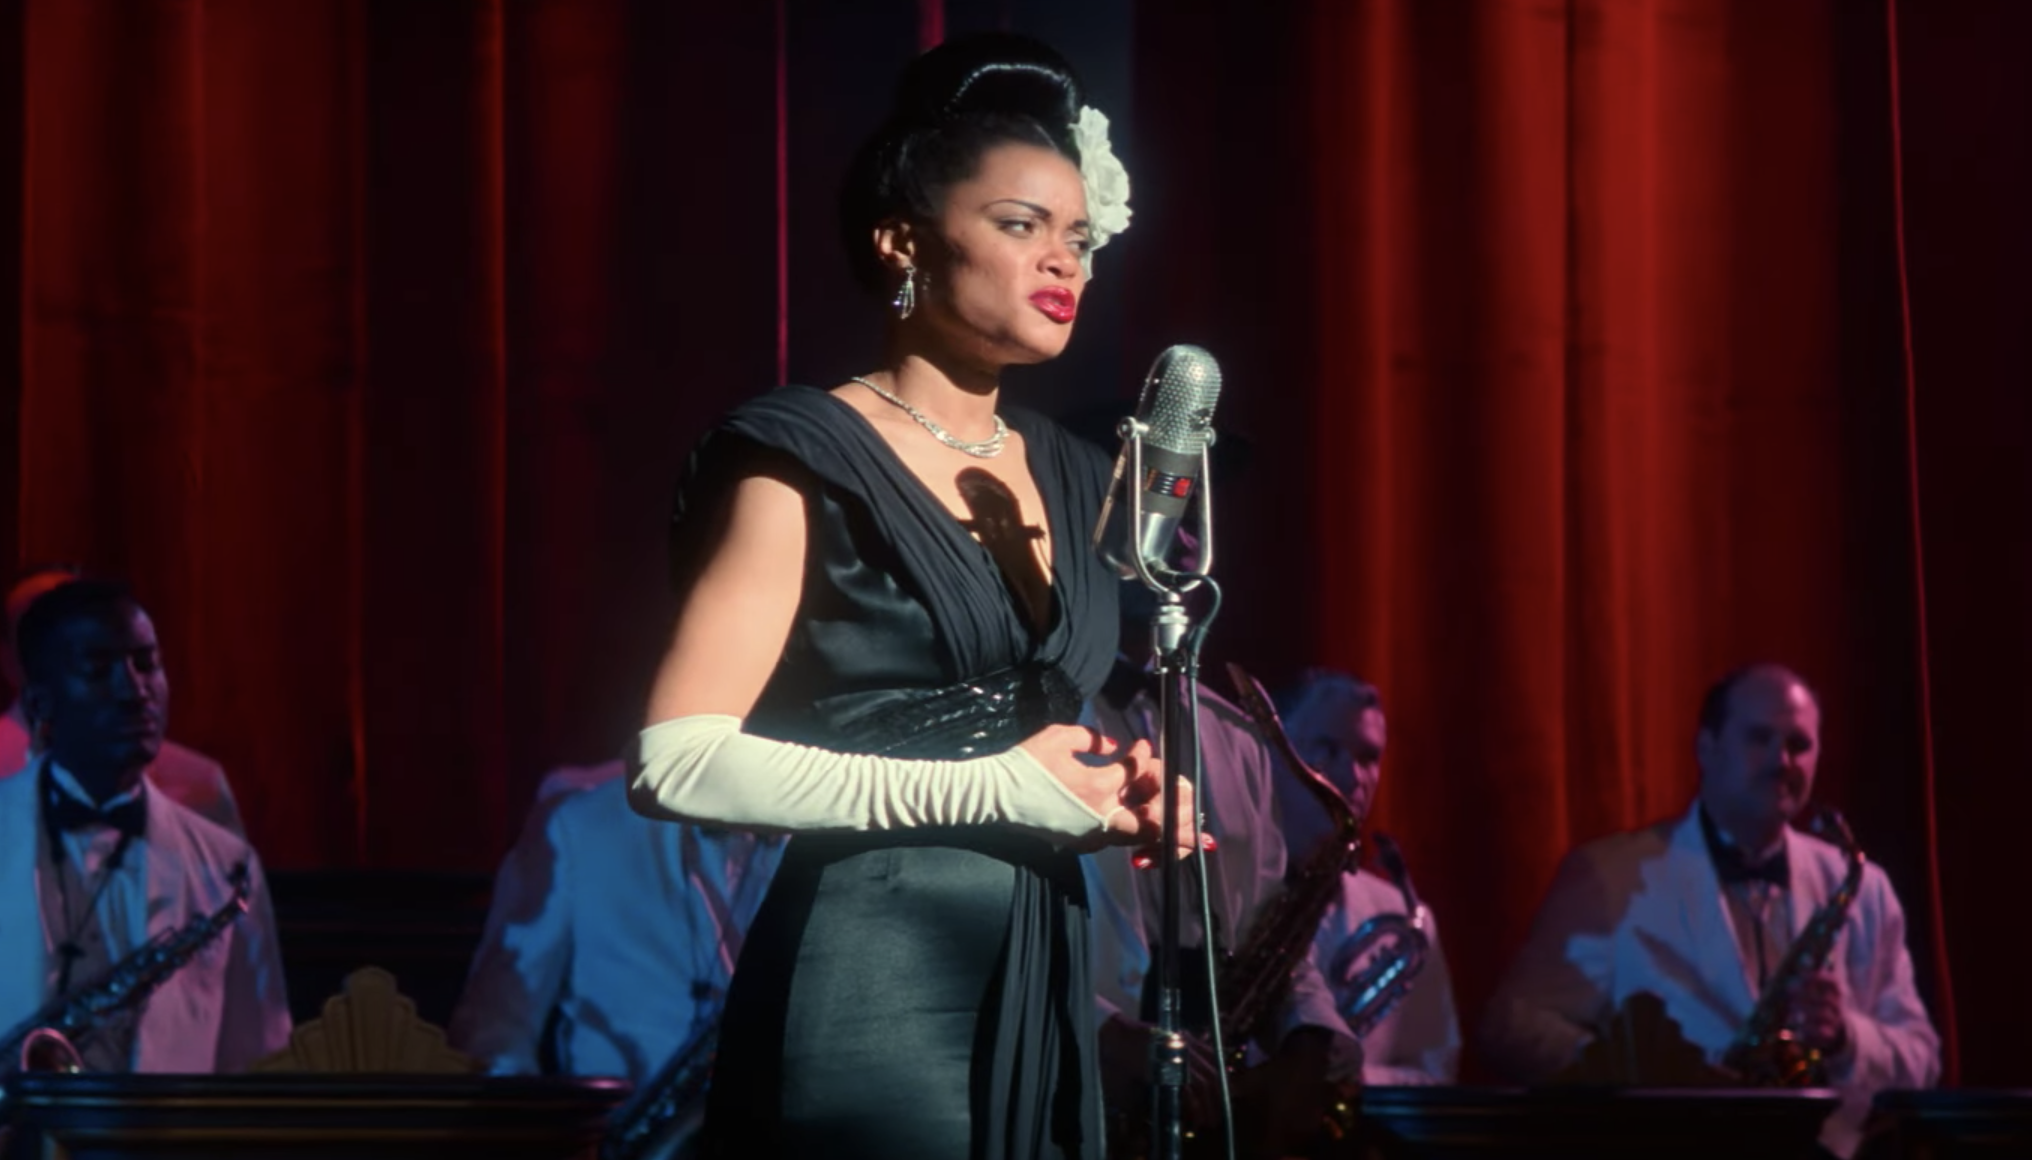 billie holiday, film review, lucas mirabella